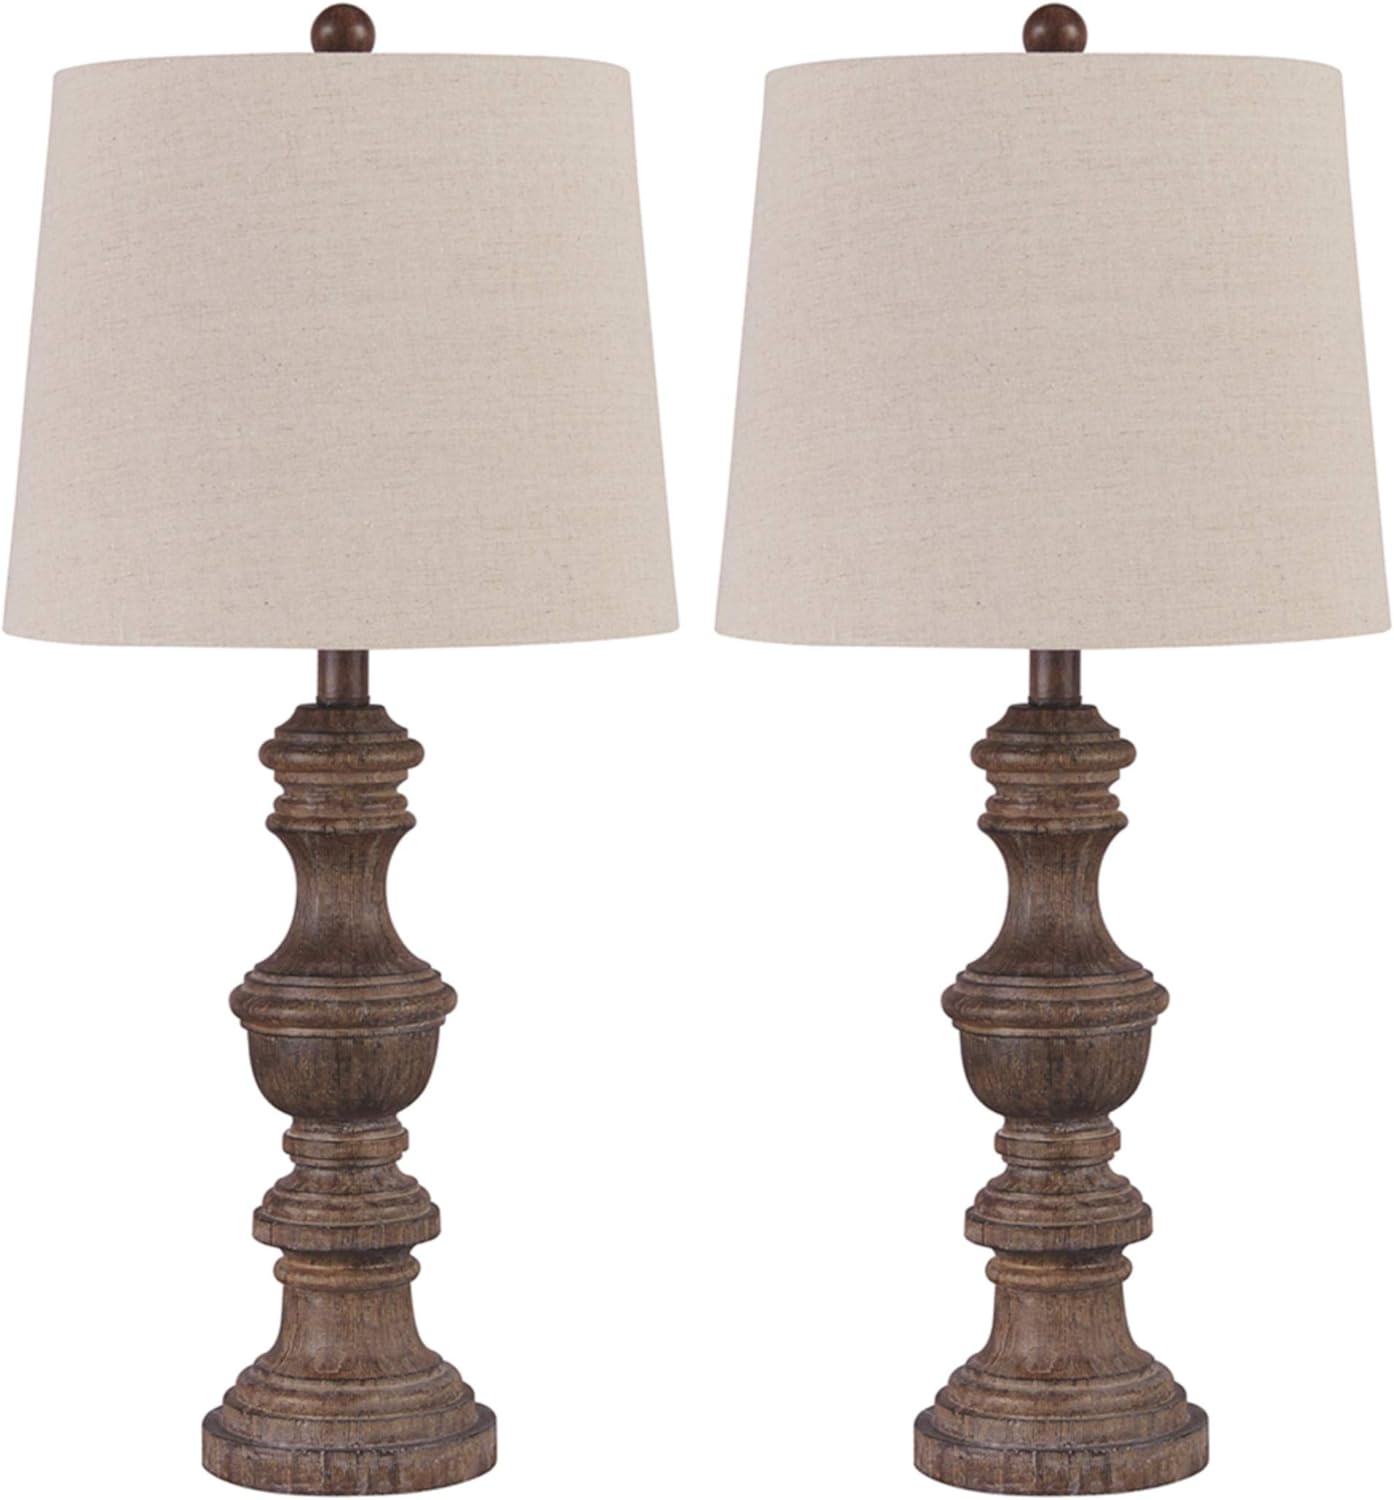 These are very nice looking lamps, we put them in our master bedroom. They are great quality and look for expensive than they are.